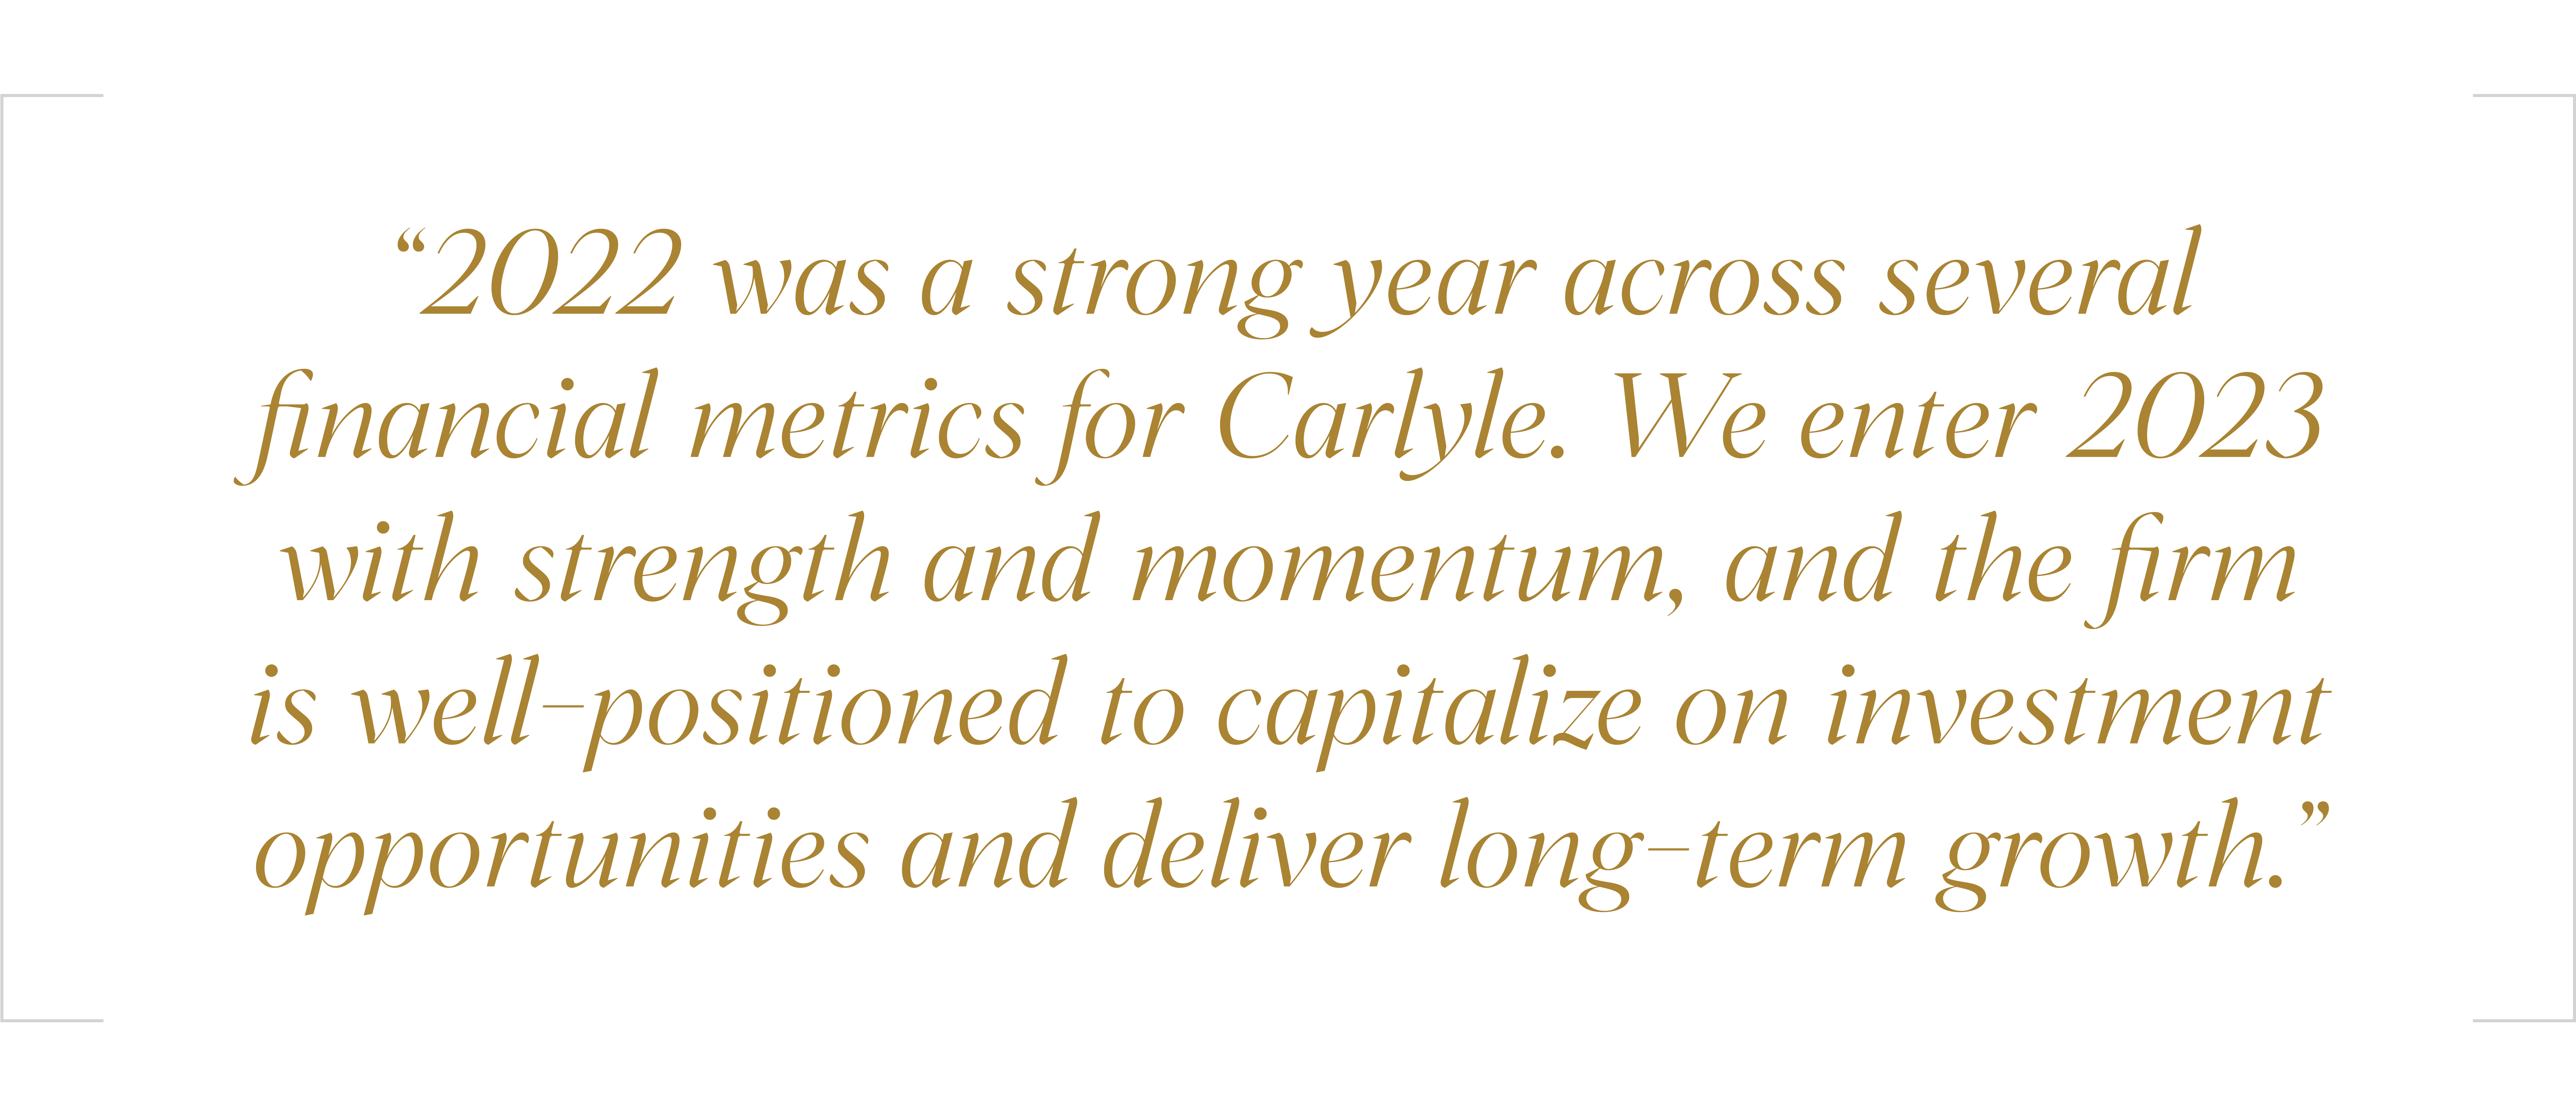 Carlyle Annual Report 2022 Quote